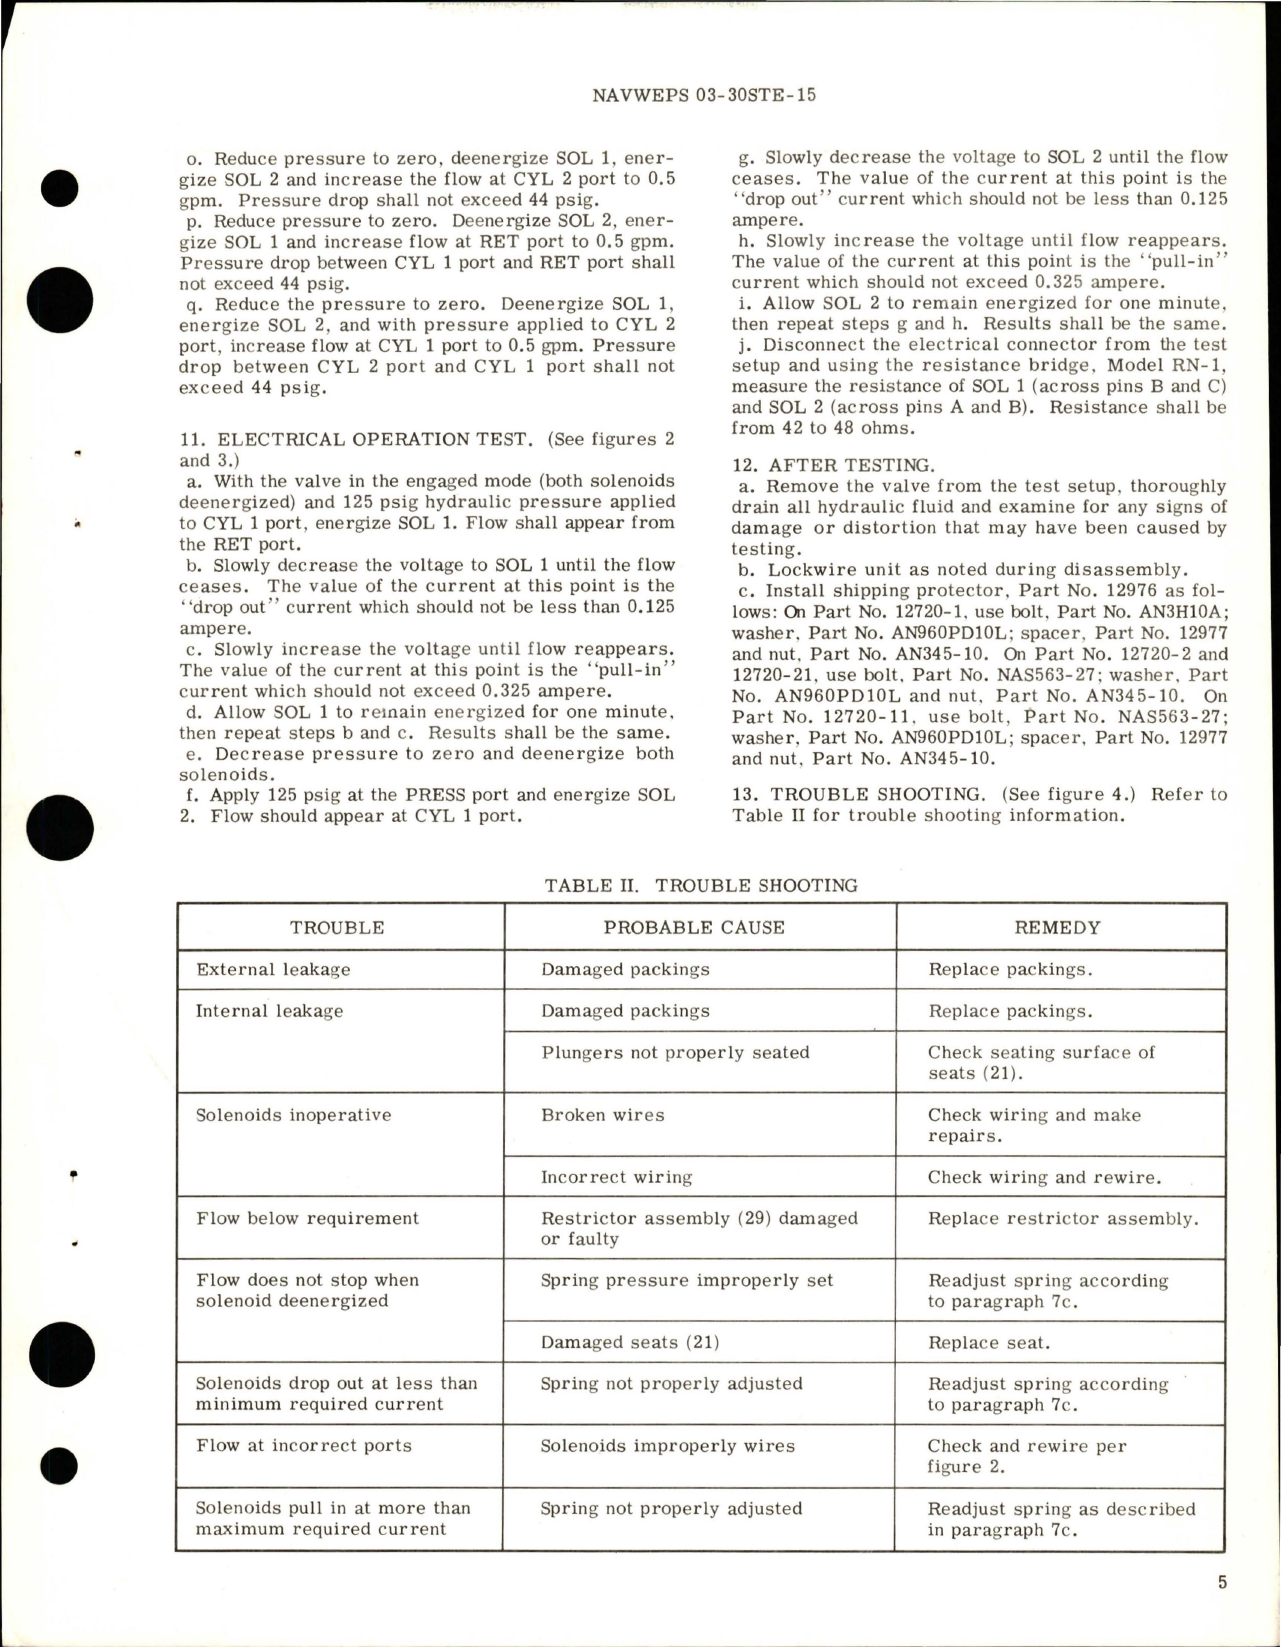 Sample page 5 from AirCorps Library document: Overhaul Instructions with Parts Breakdown for Stick Trim Control Valve - Part 12720-1, 12720-2, 12720-11, and 12720-21